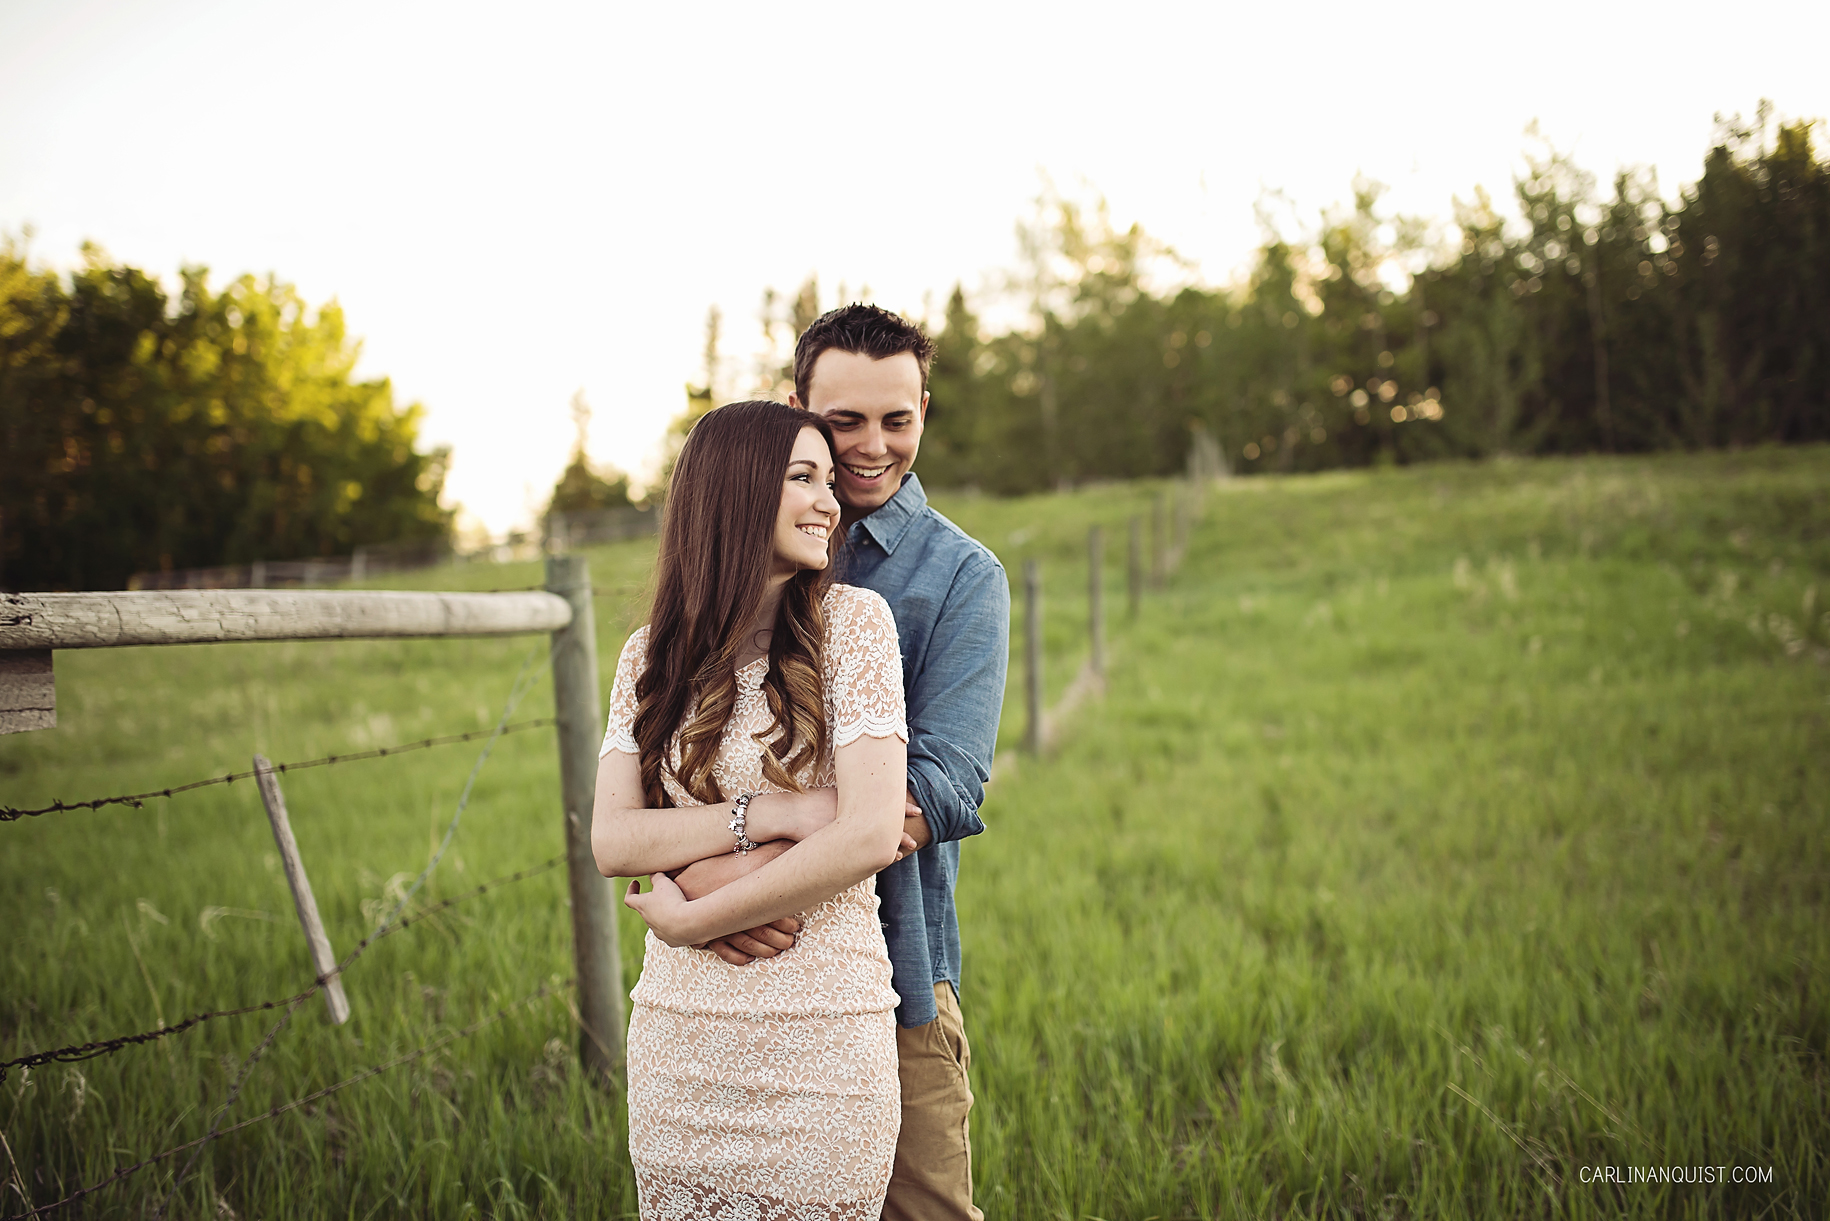 Natural Engagement Photos | Carlin Anquist Photography